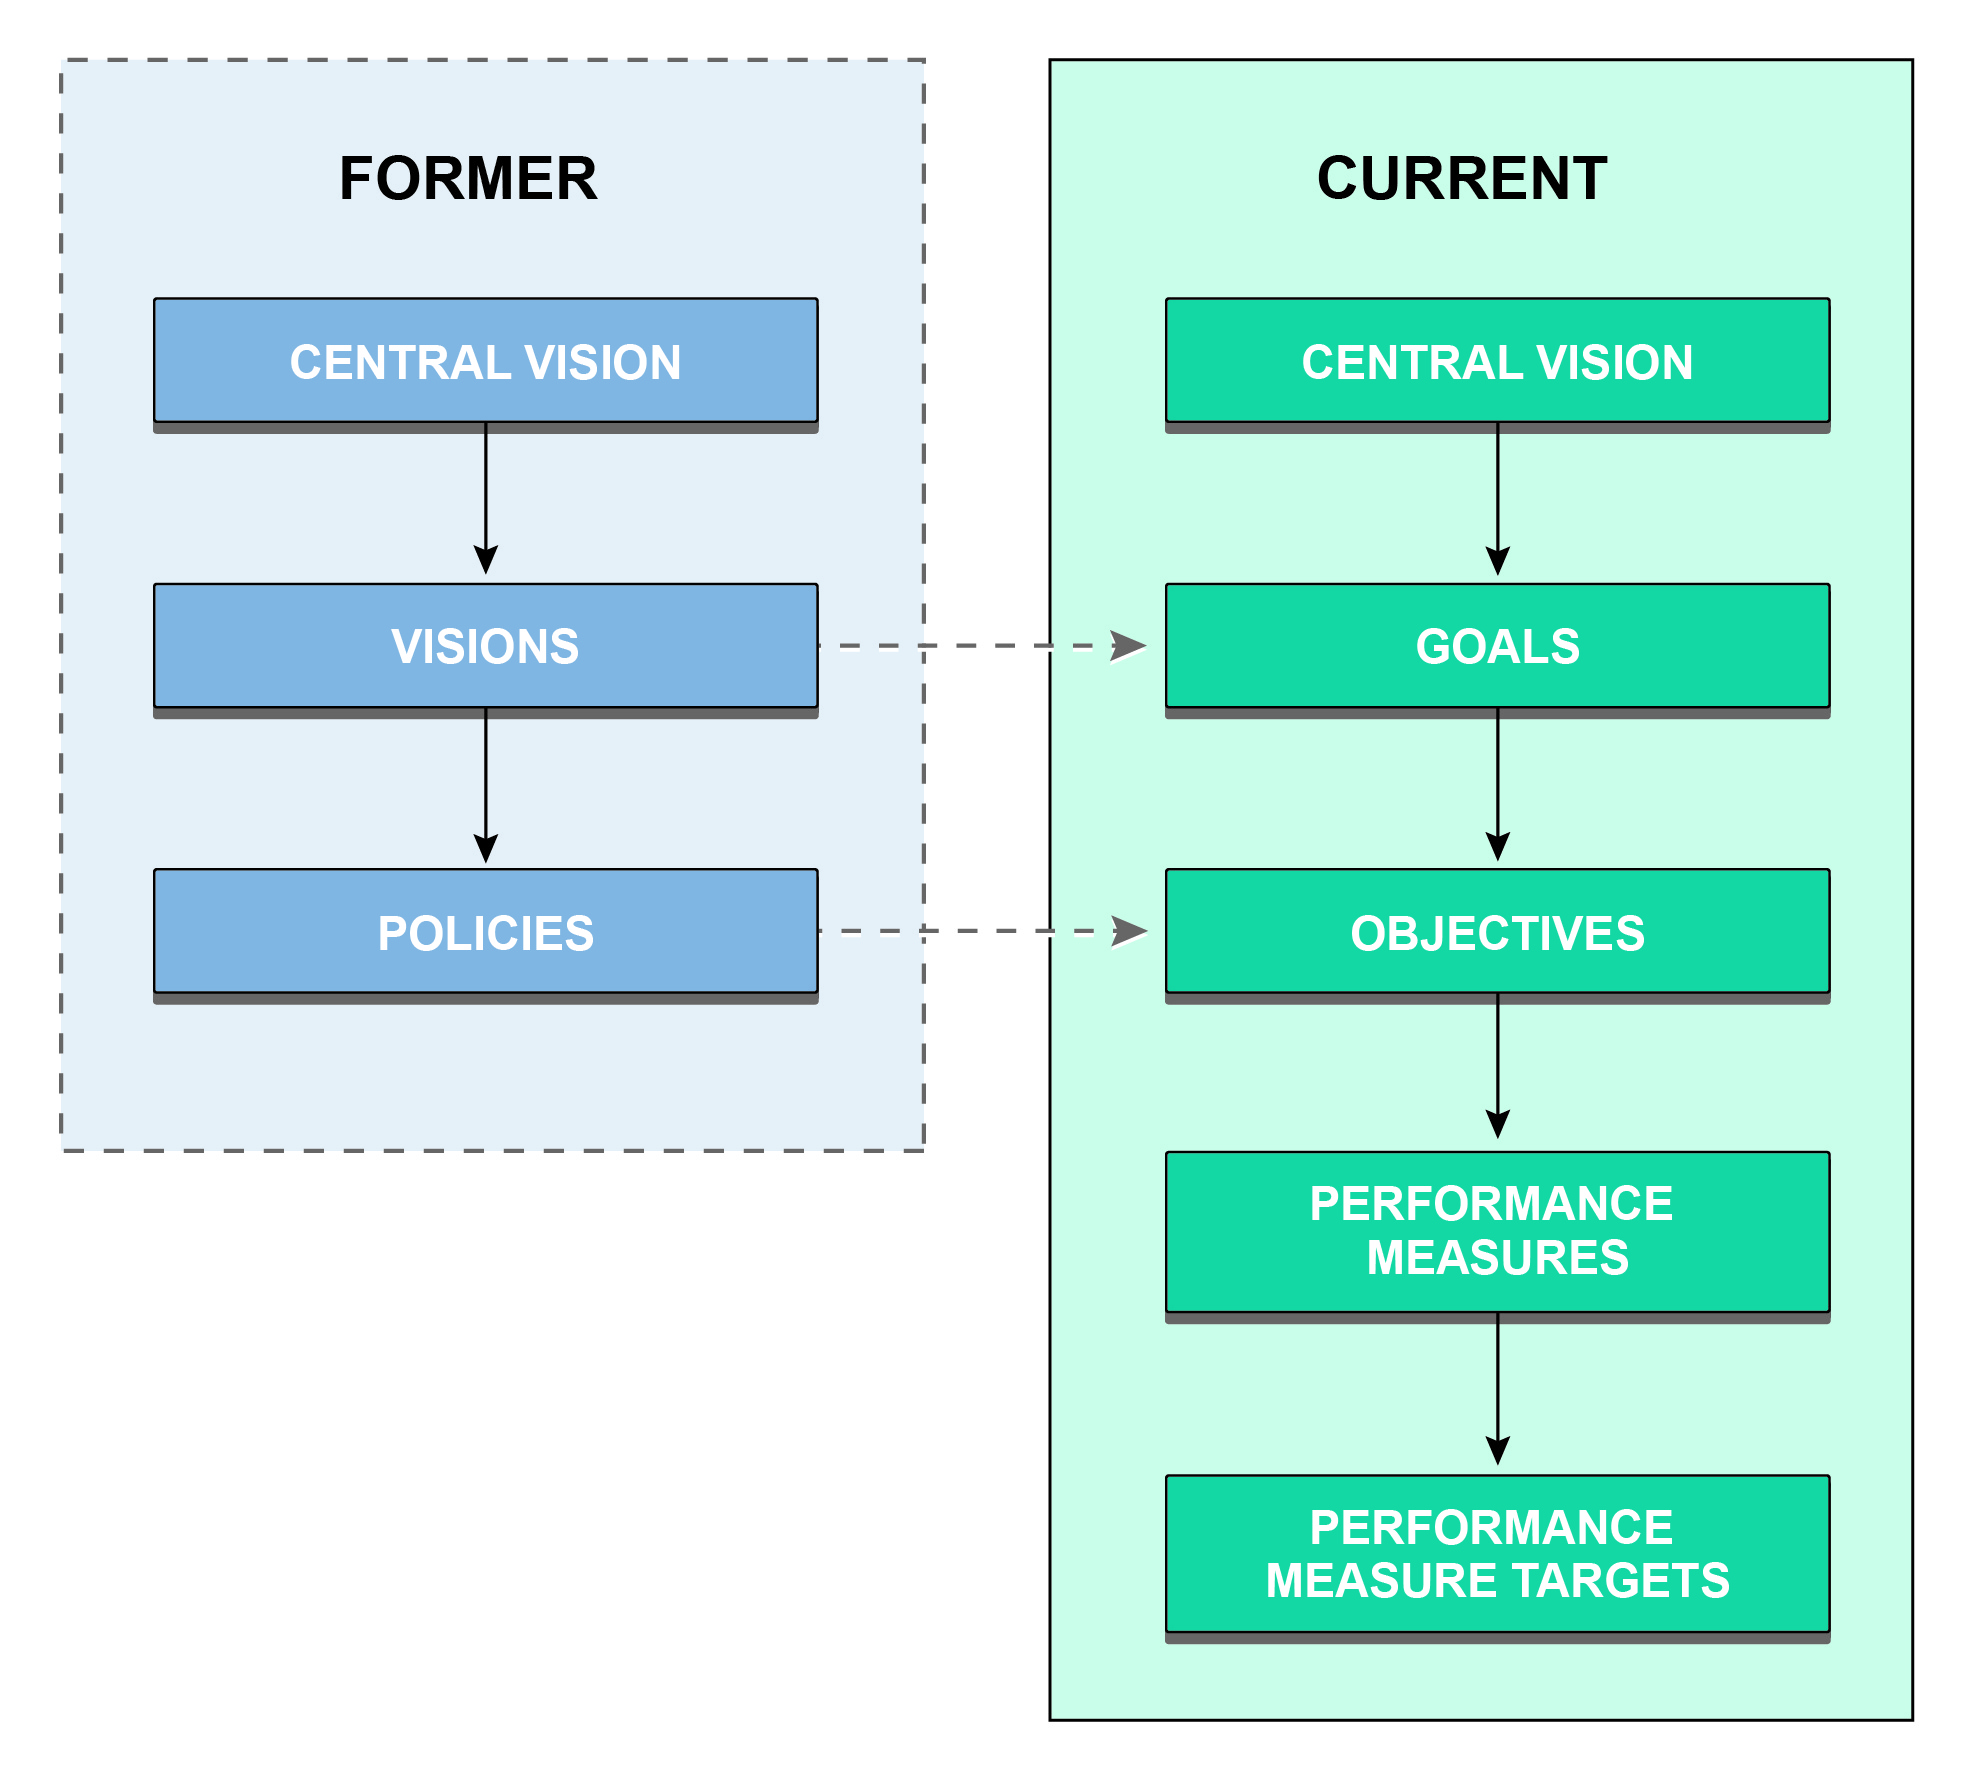 FIGURE 2. Converting Visions and Policies to Goals and Objectives
This graphic consists of two vertical rectangles. It displays the MPO’s current visions and policies (in the rectangle on the left) with arrows indicating how they link to the proposed goals and objectives (in the rectangle on the right).